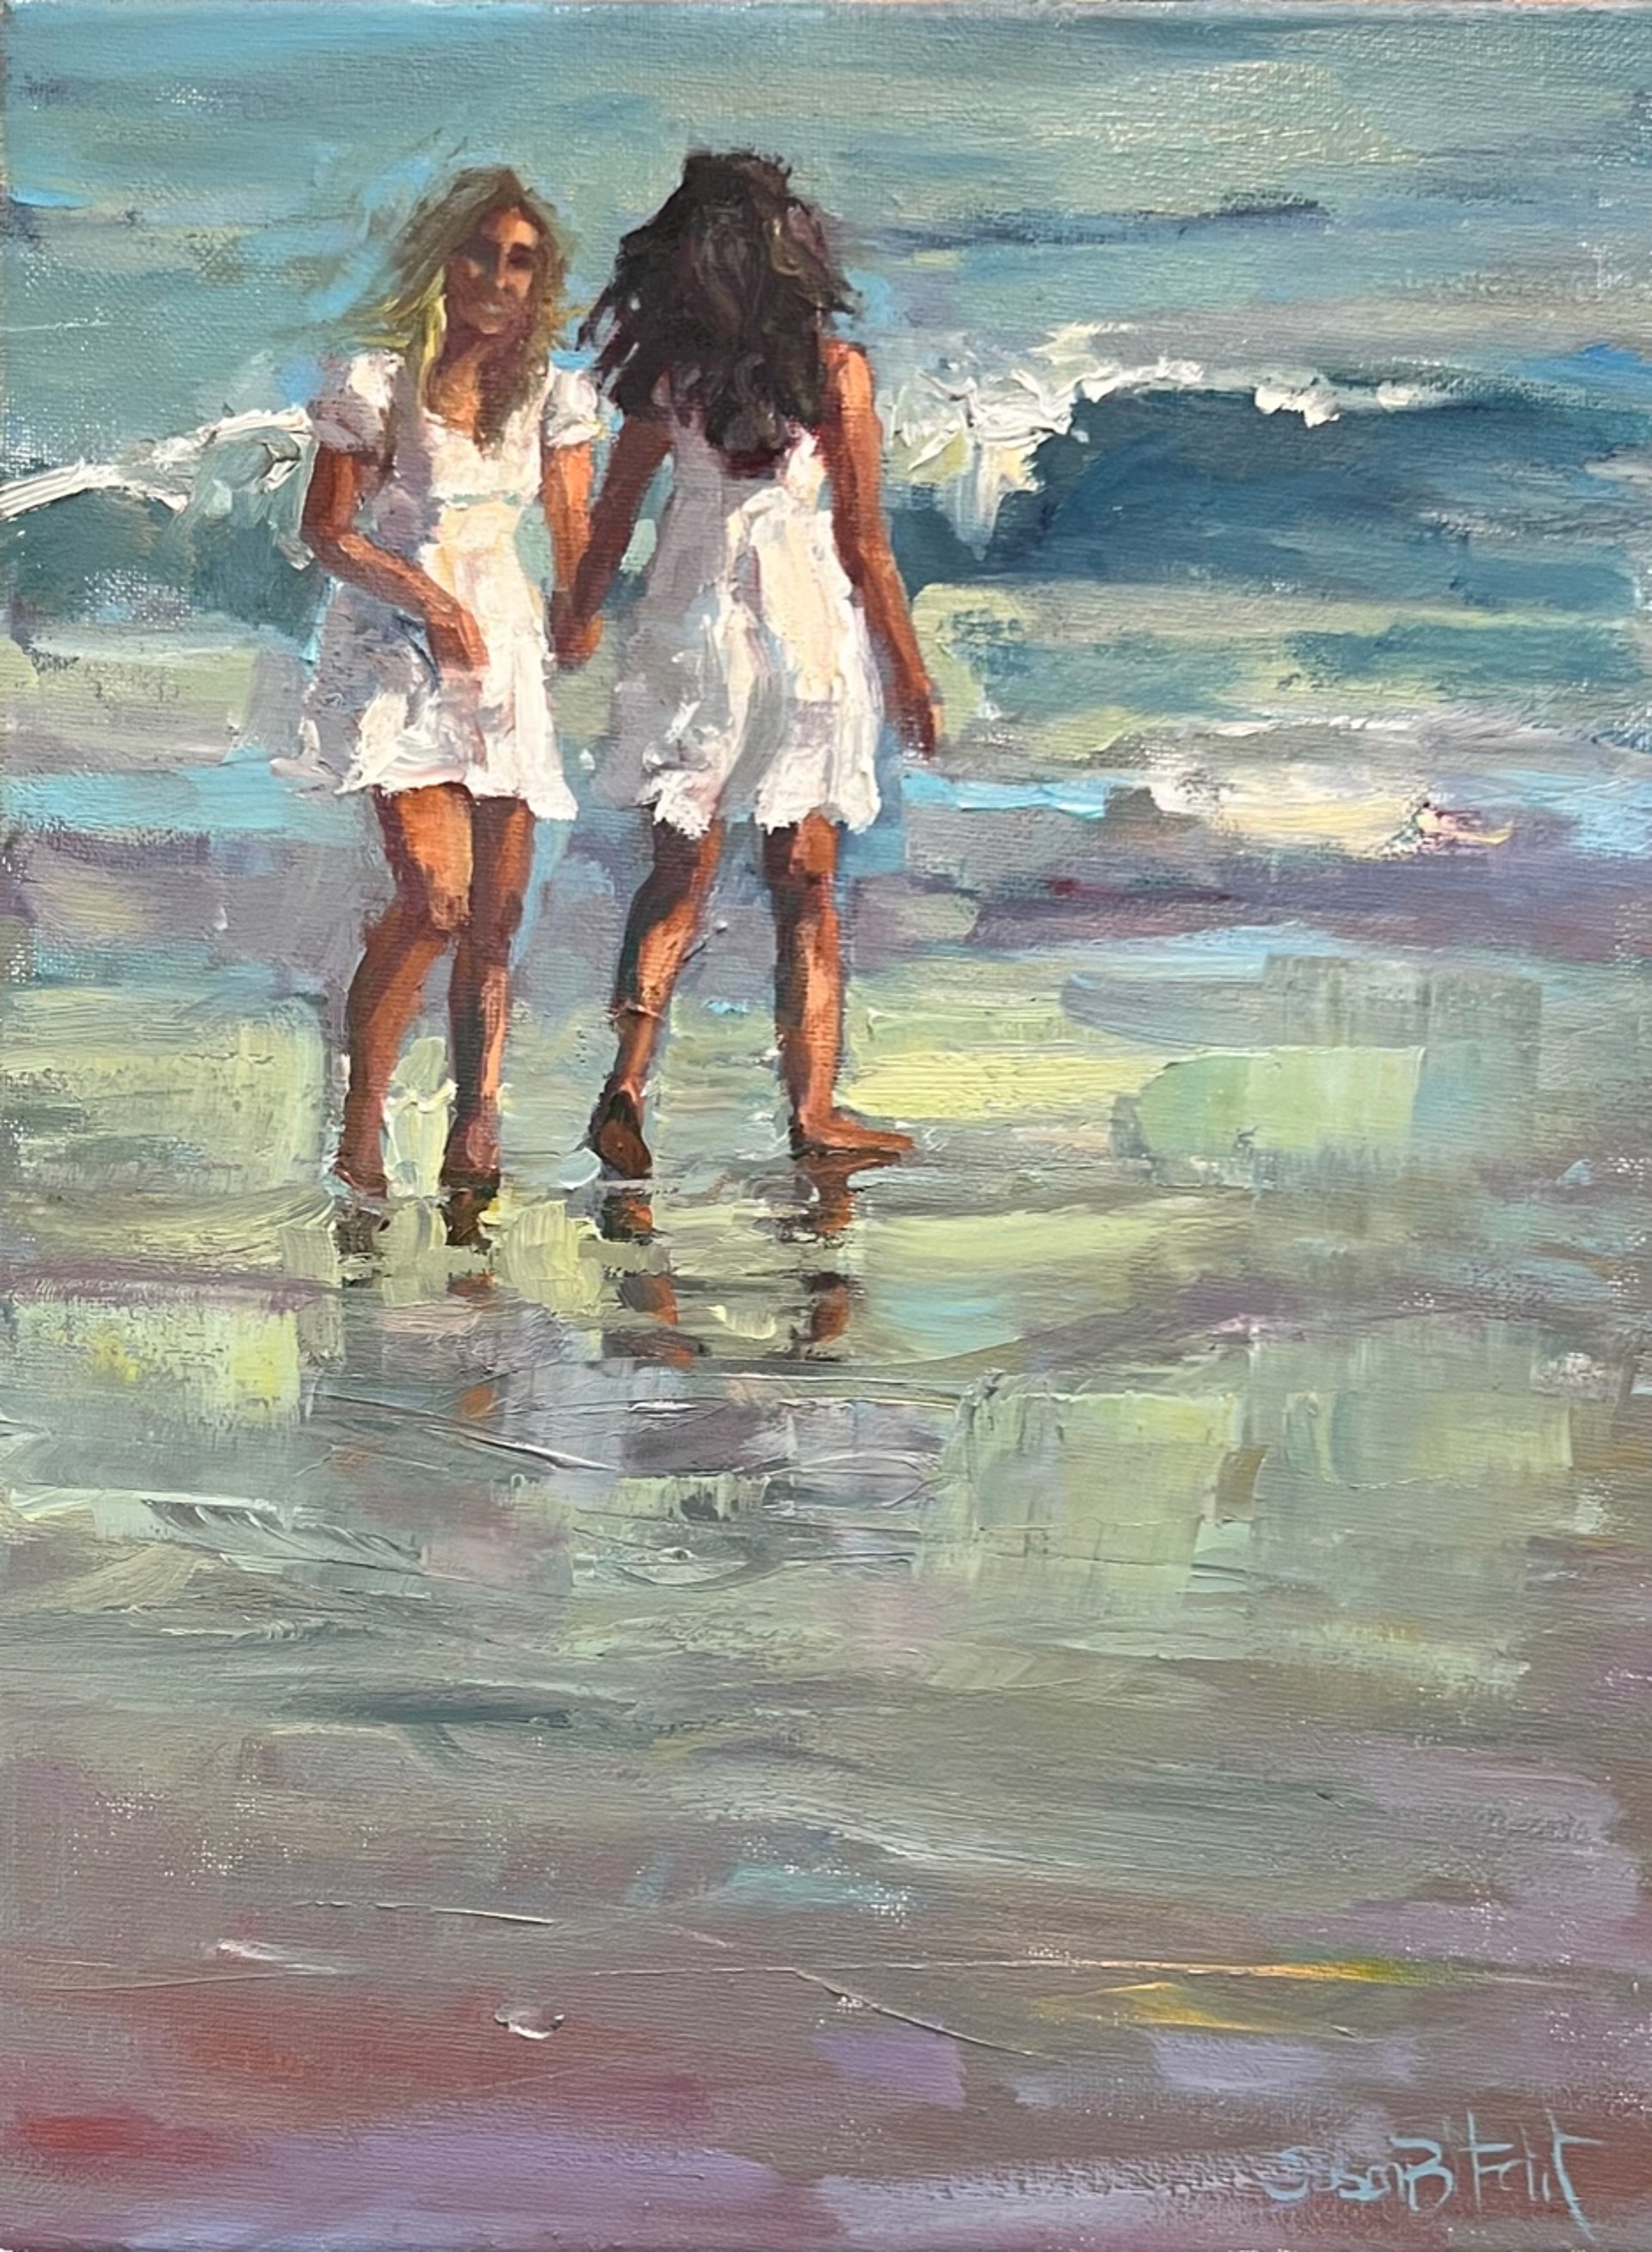 Sisters by Susan Hecht